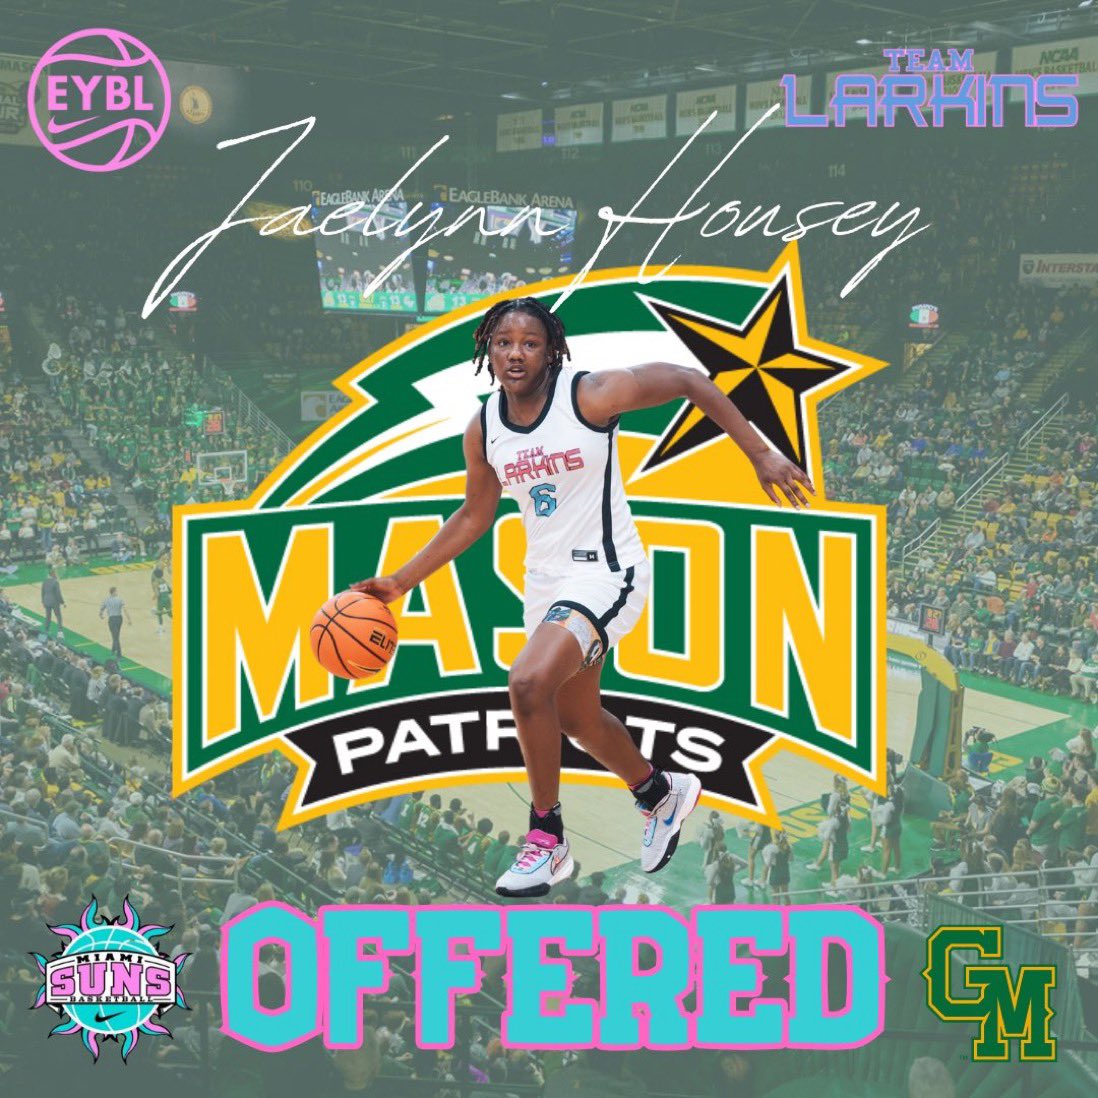 Beyond grateful for this offer from @CoachVBL and @MasonWBB. Thank you so much!!